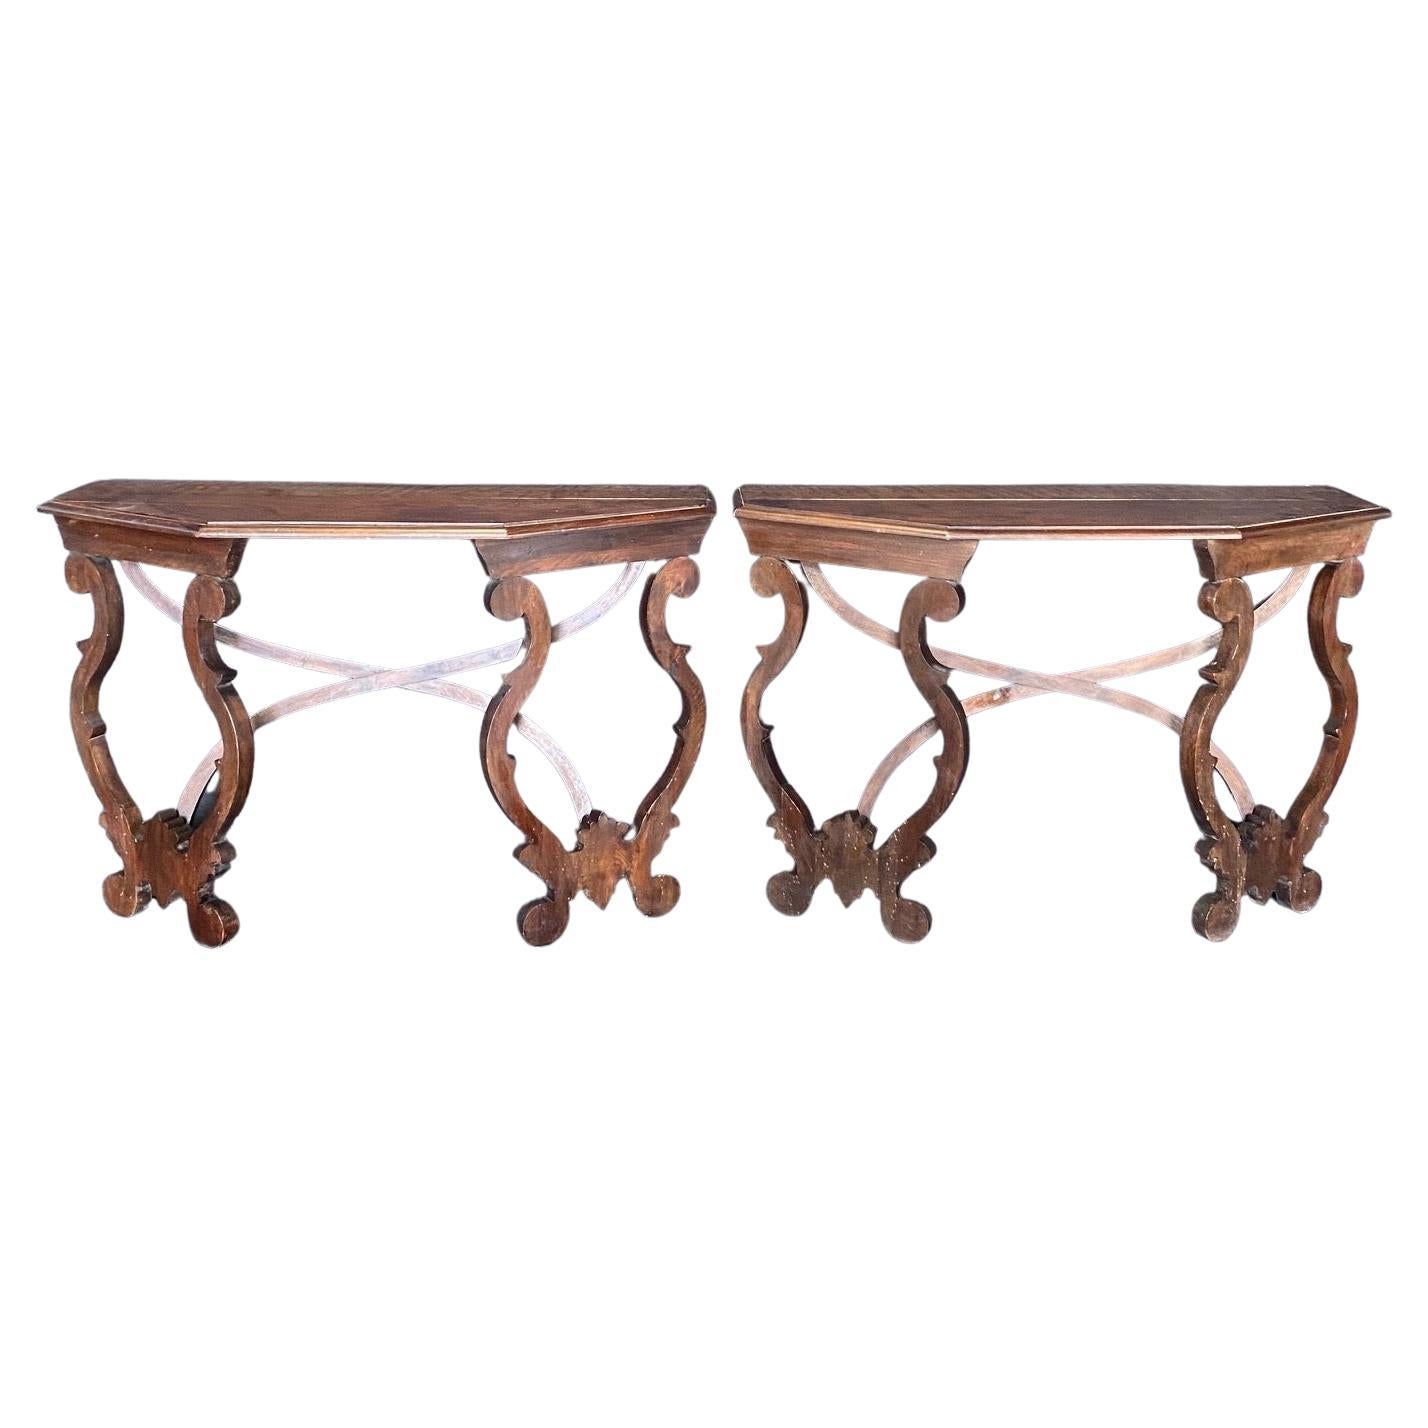 Pair of Italian Baroque Early 18th Century Demilune Walnut Console Tables For Sale